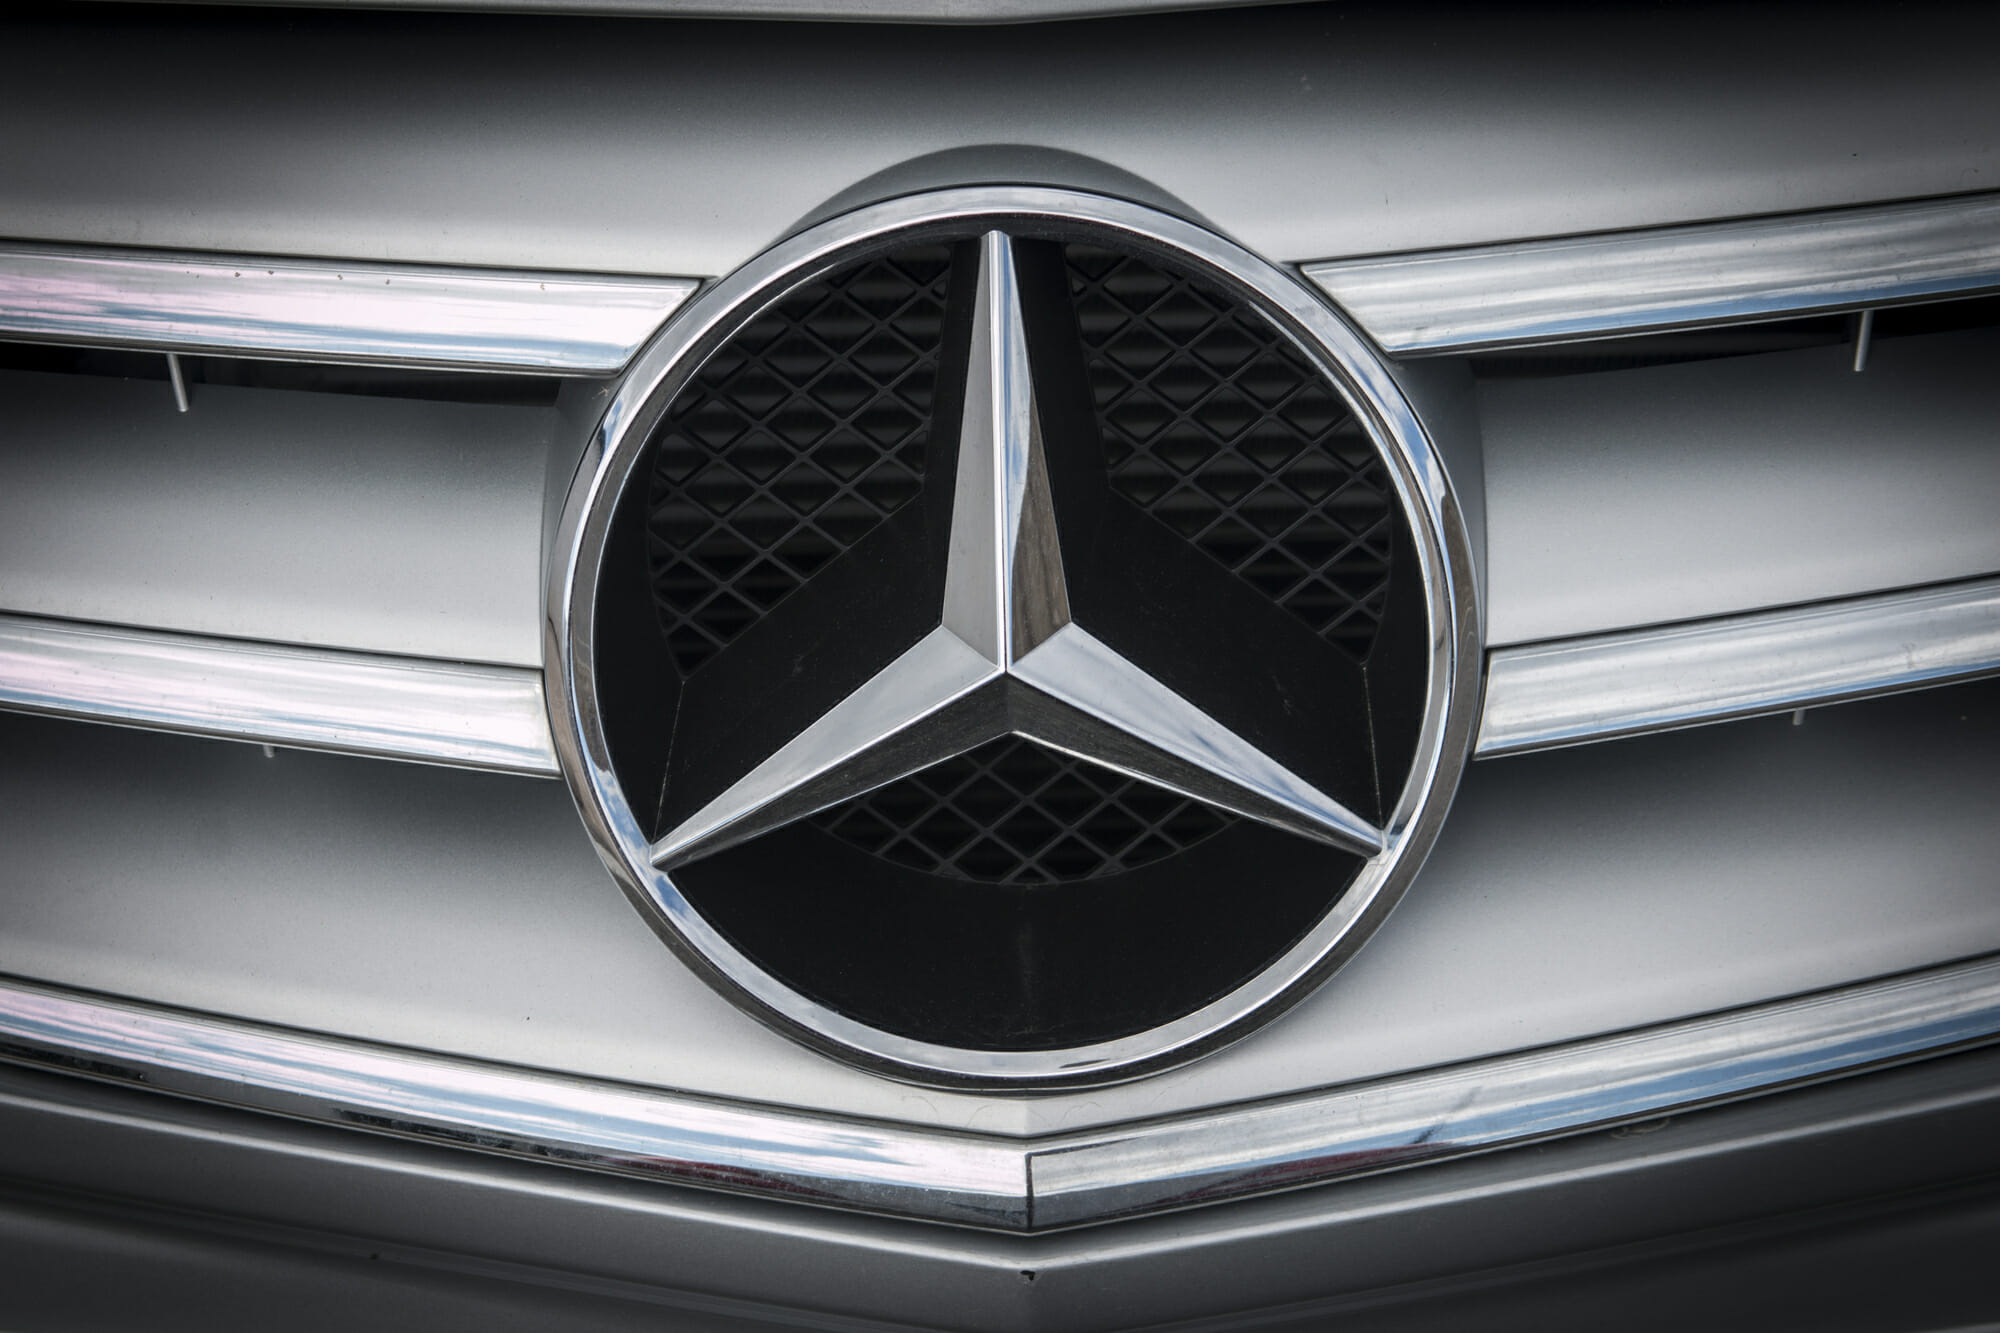 Why Not to Buy a Luxury Car Like Mercedes